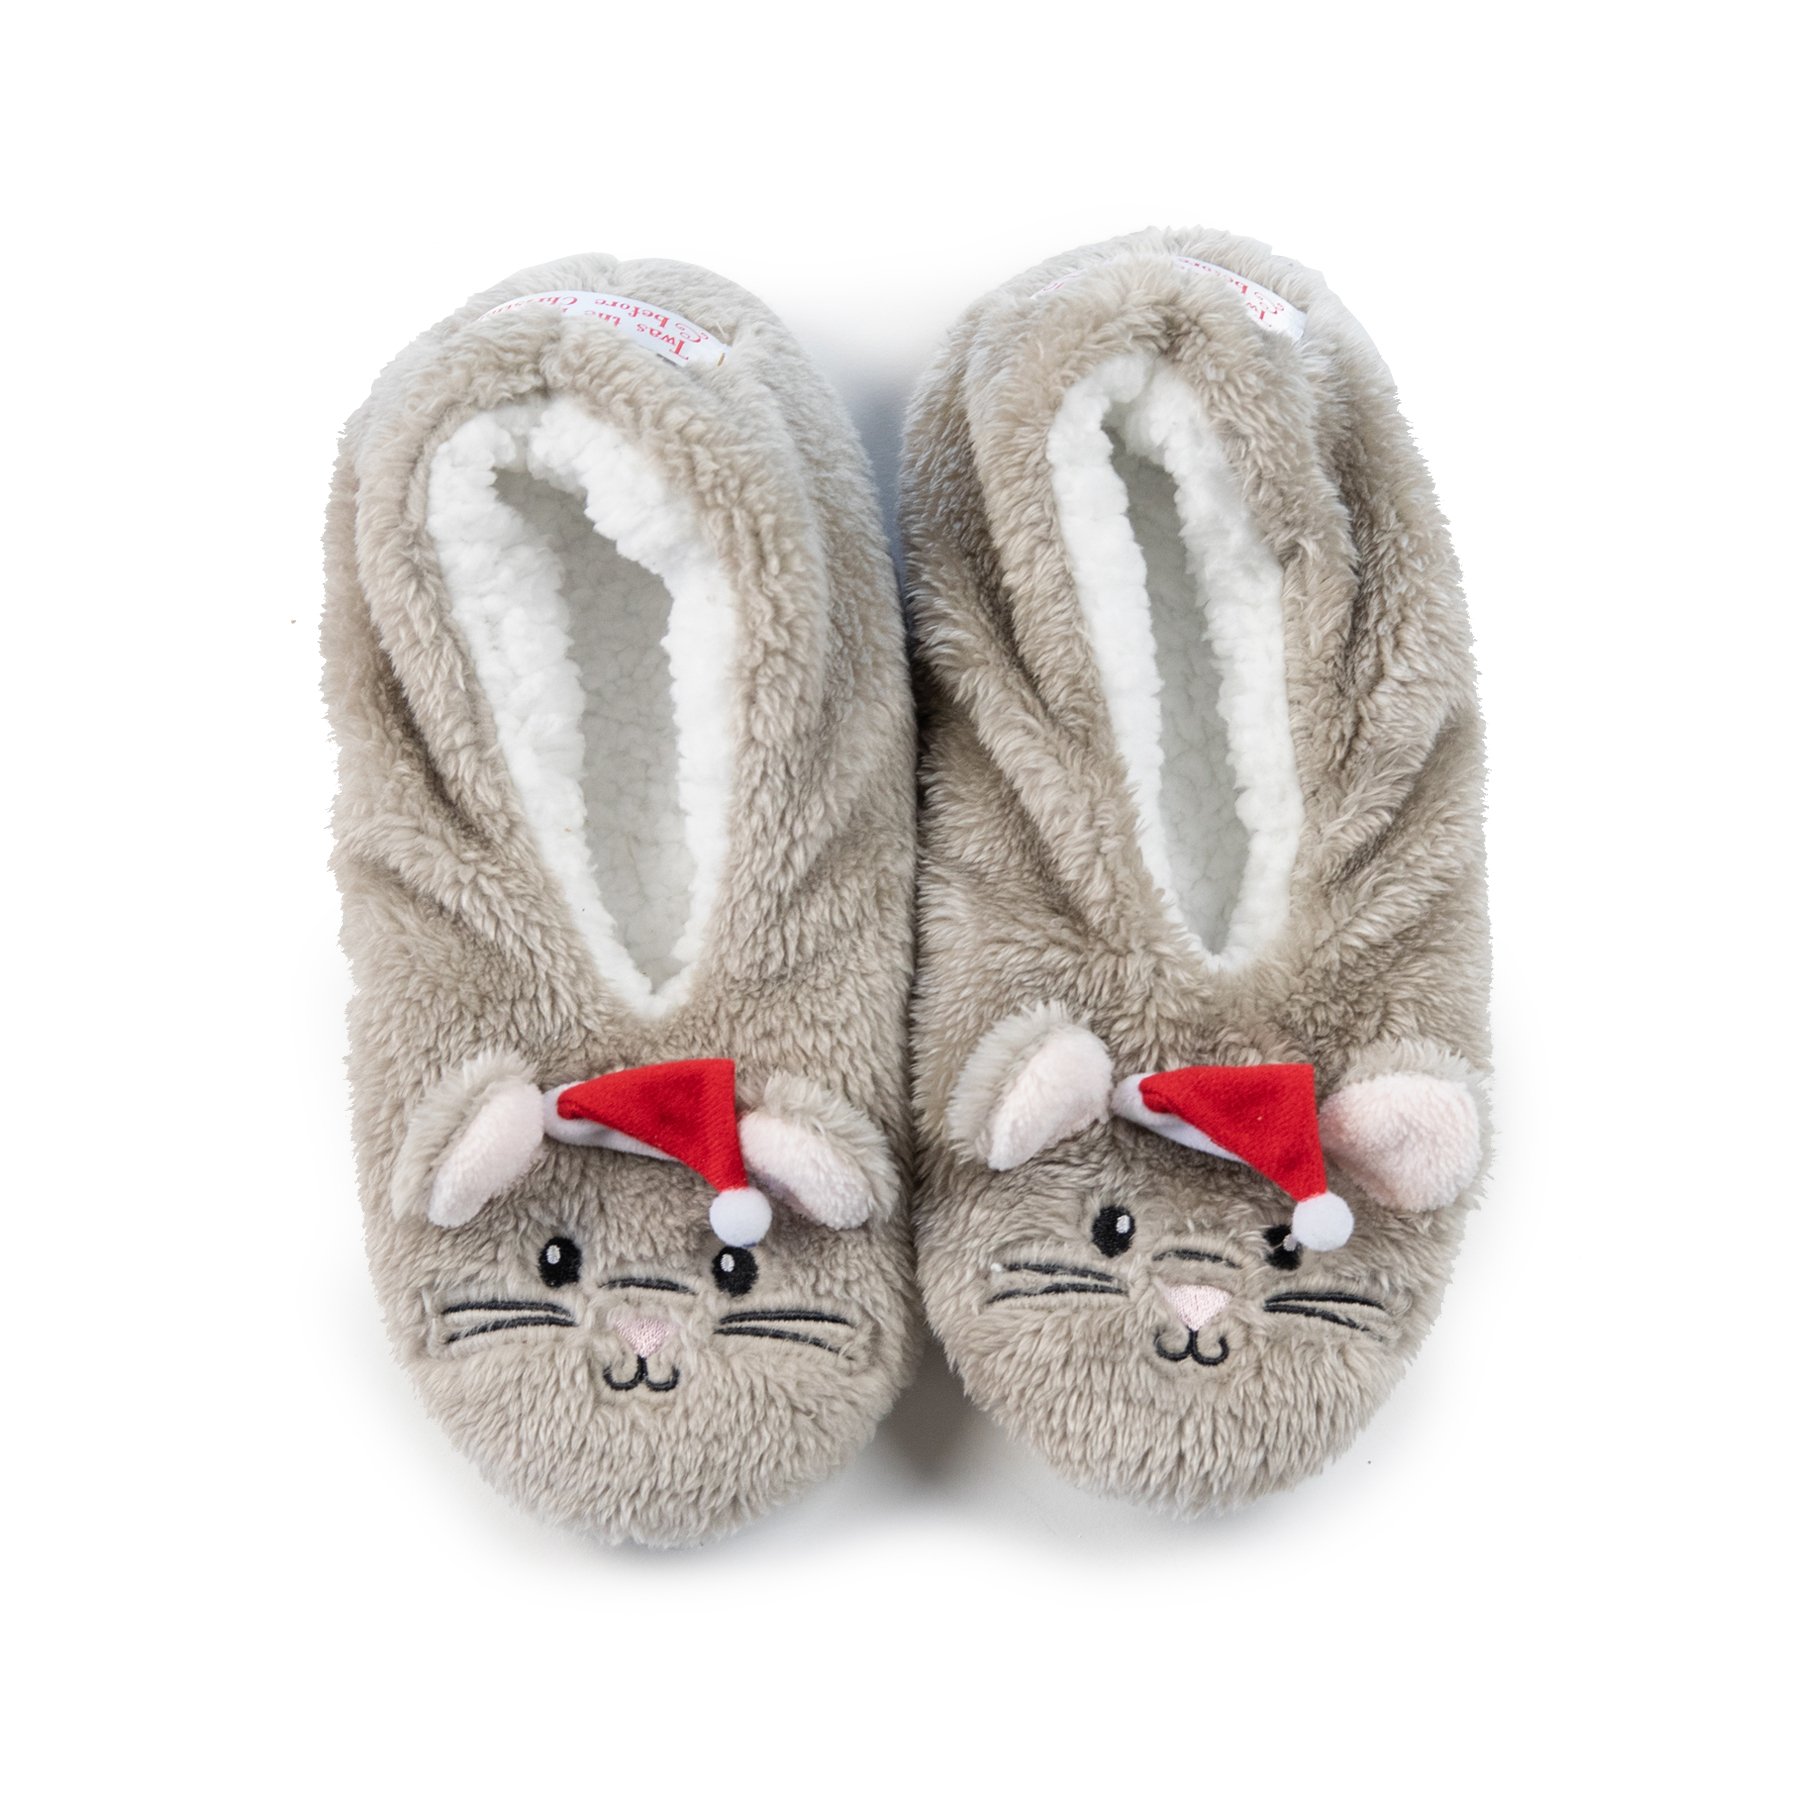 Faceplant Dreams Footsies Slippers Mouse Holiday Motif Large - image 1 of 5